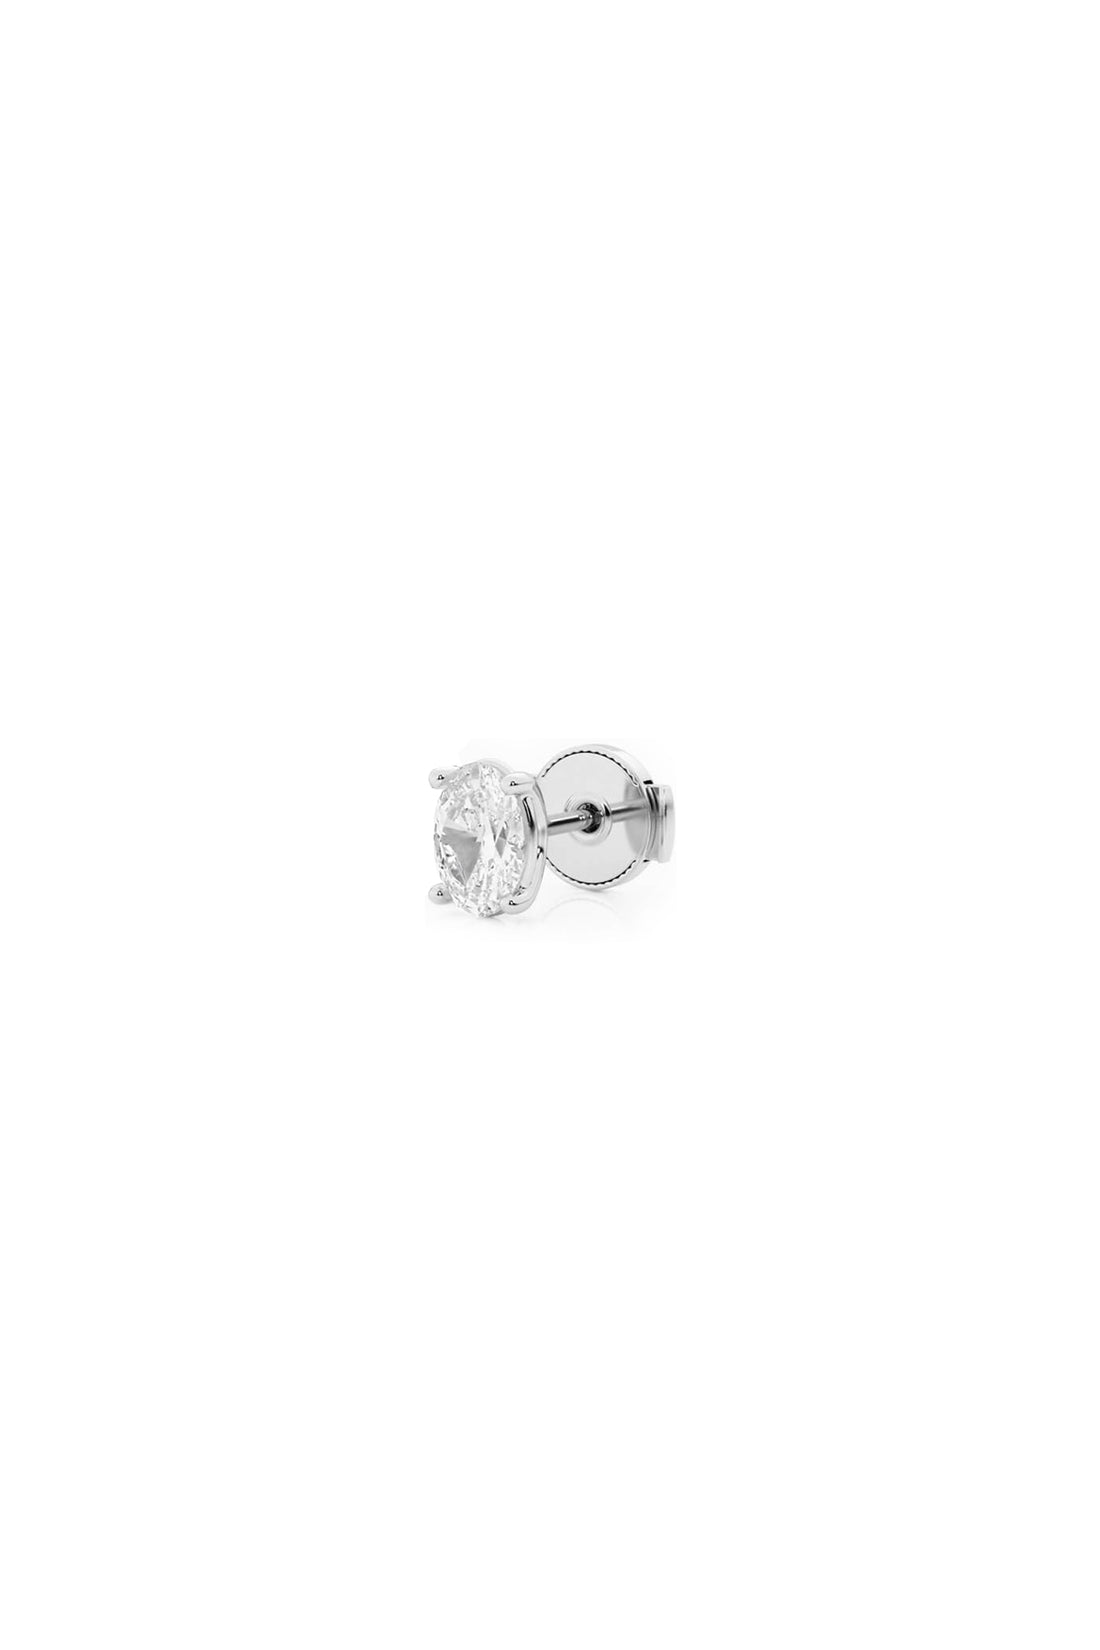 Ethereal .50ct Oval Stud